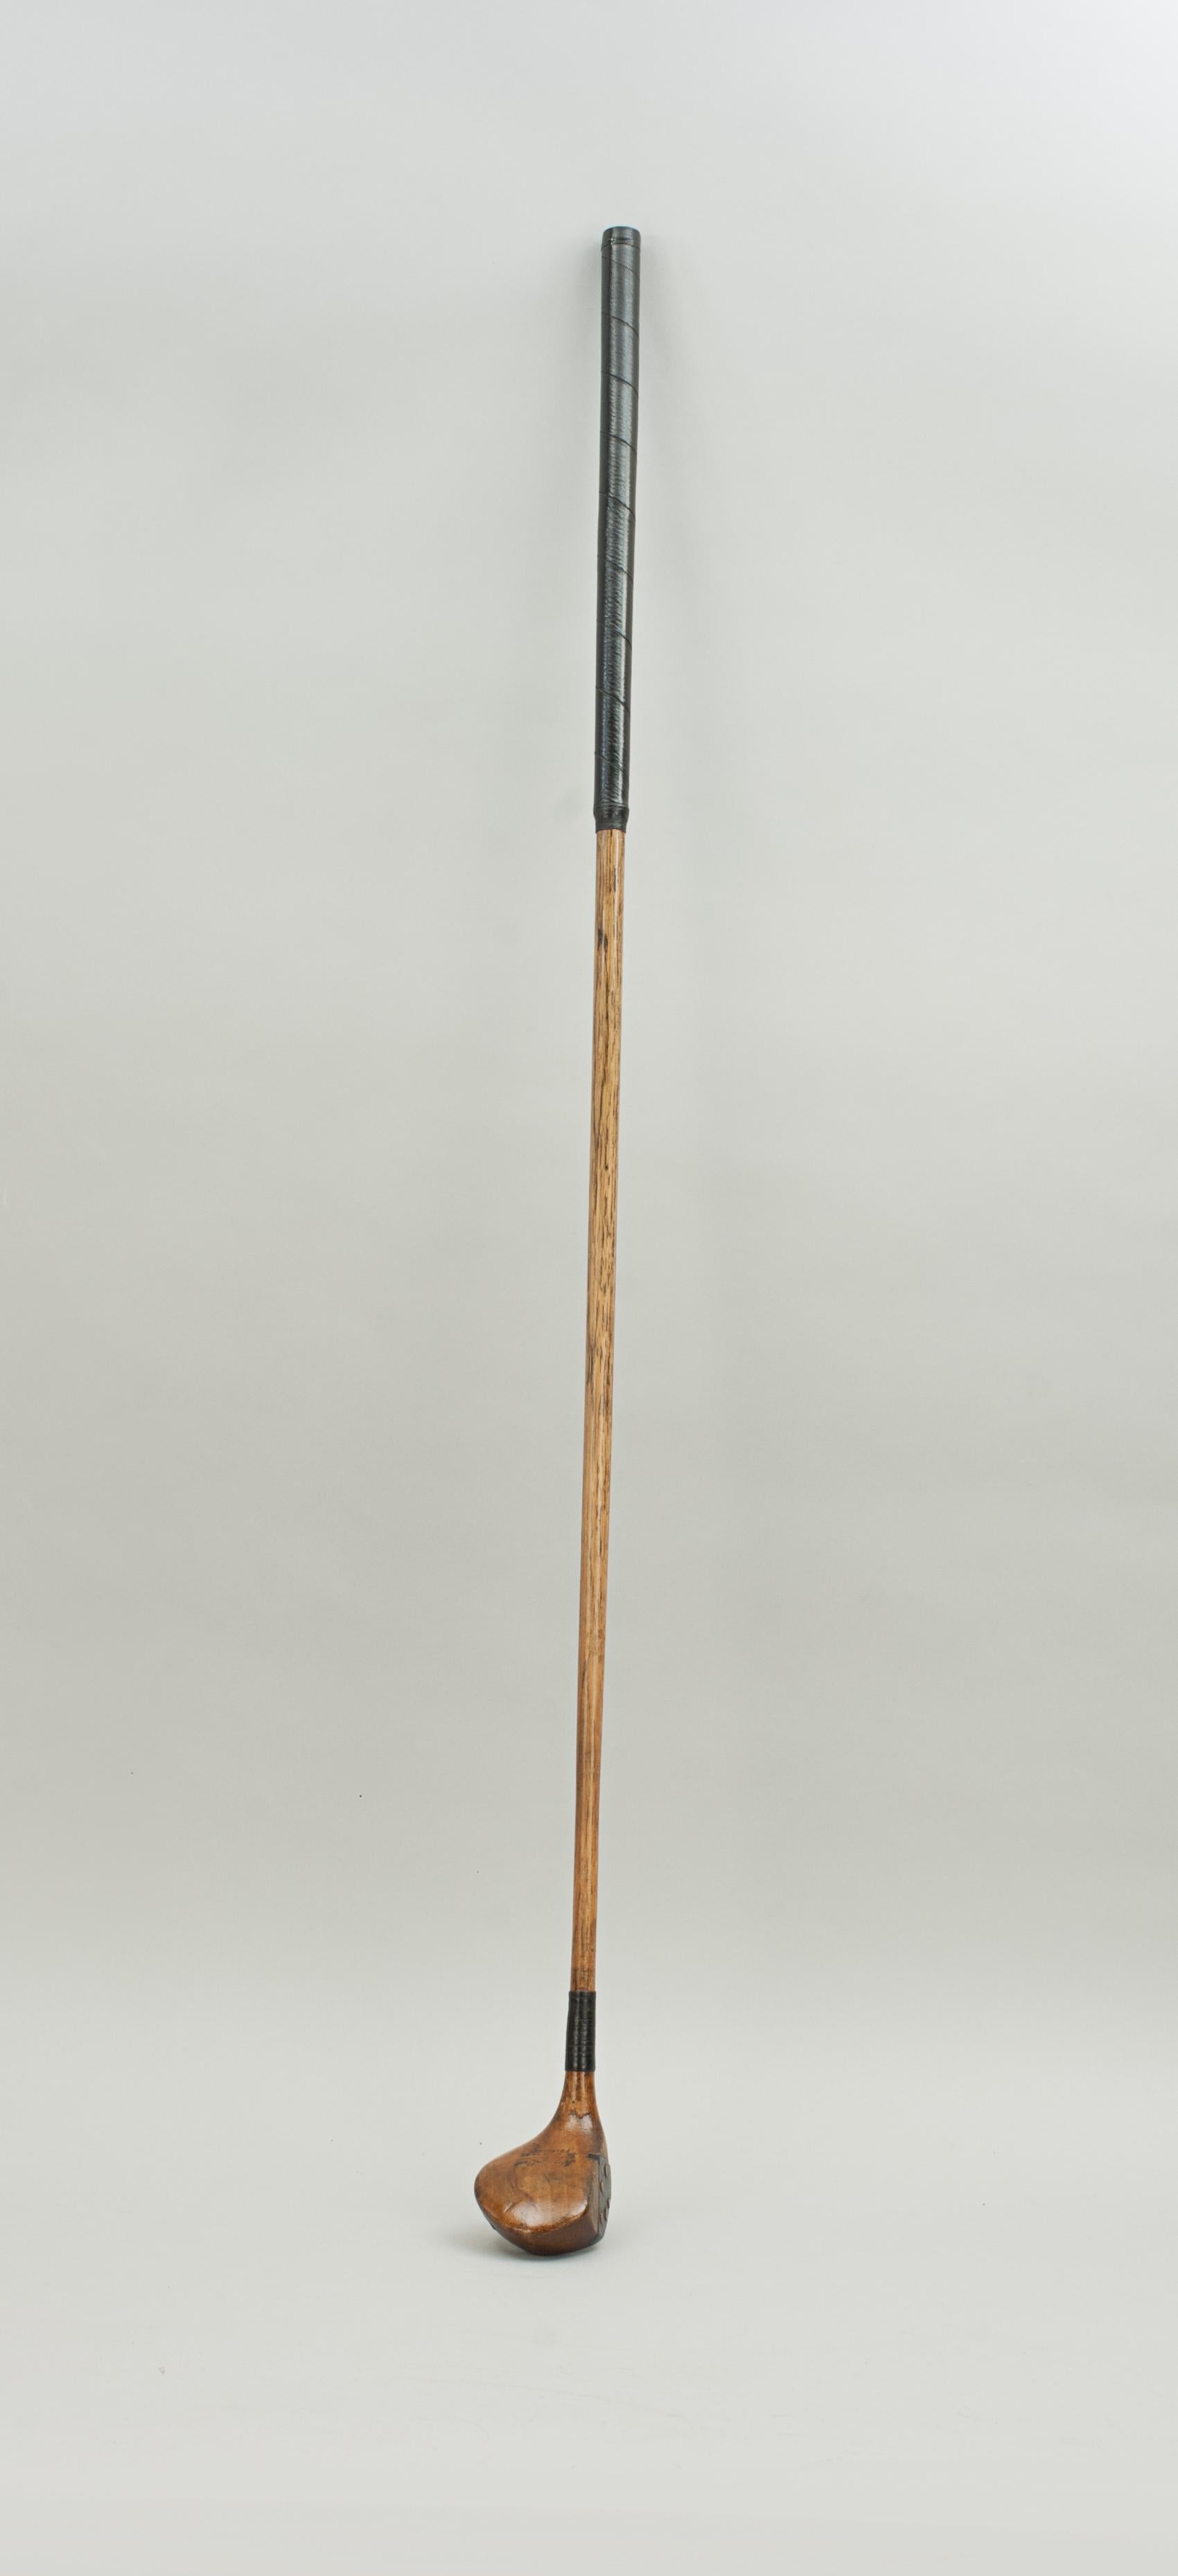 Hickory Shafted Golf Club, Driver.
A small head socket head driver with faint name stamp reading Hardy Bros. 10 Princess St. Edinburgh. The beech-wood head fitted to a hickory shaft with later polished leather grip. Head with lead weight to the